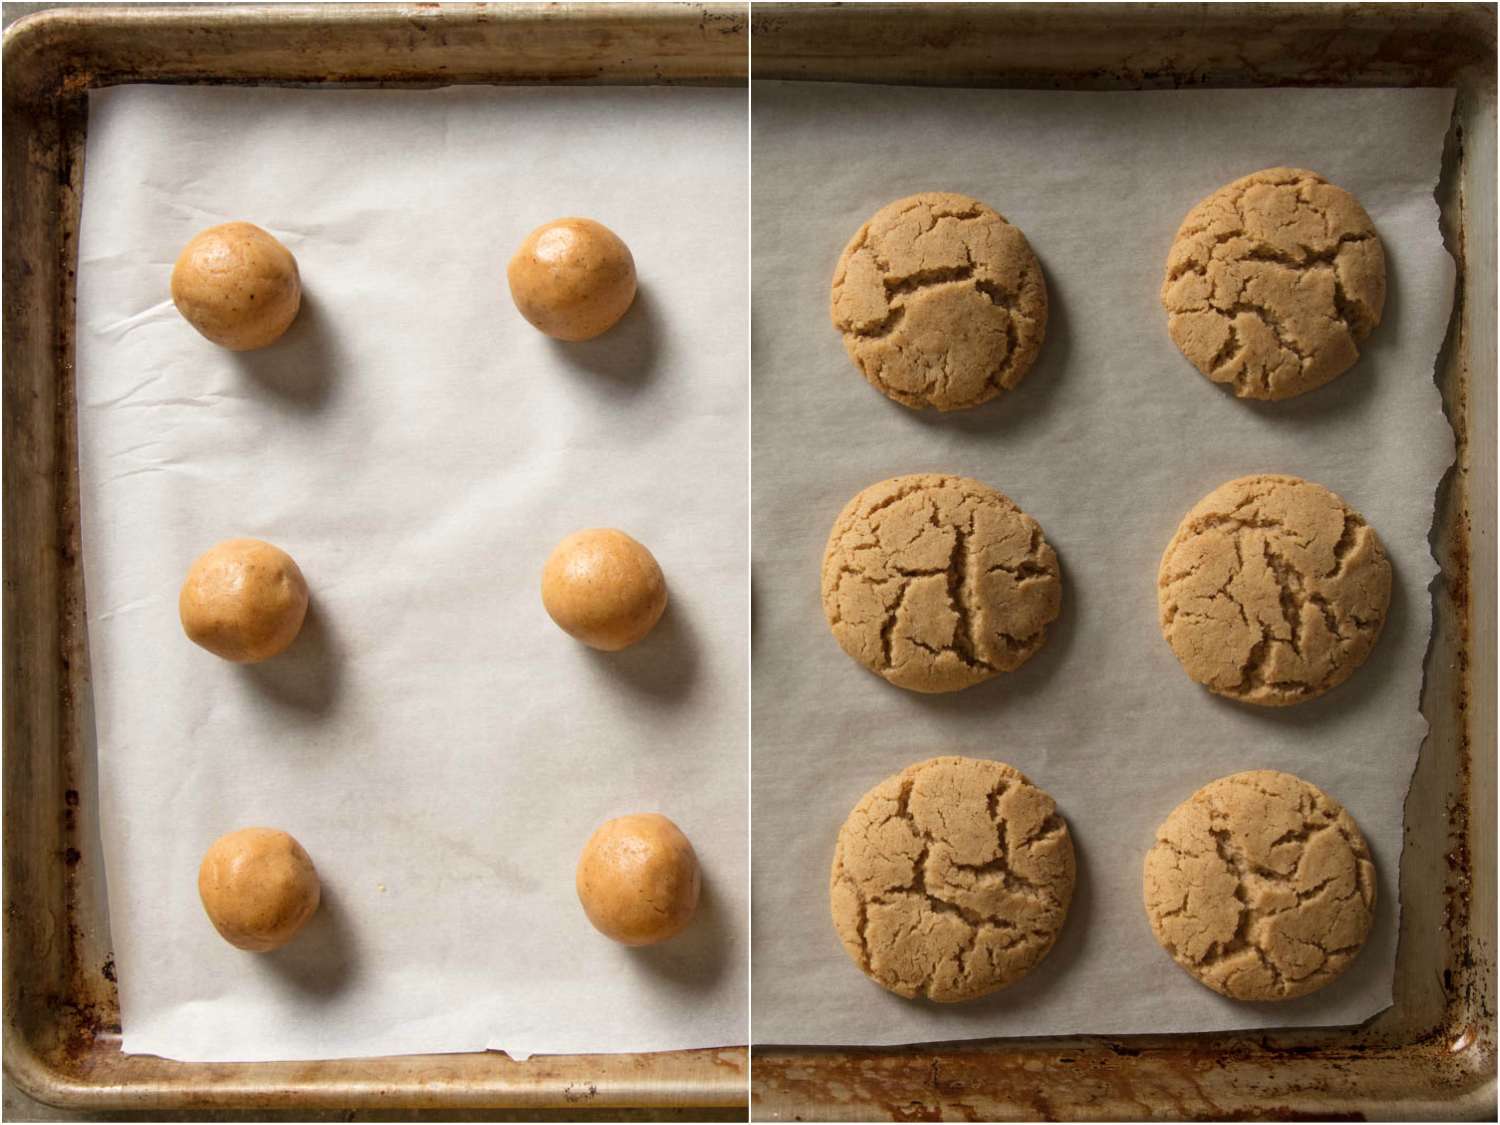 Composite of hazelnut sugar cookie dough before and after baking.